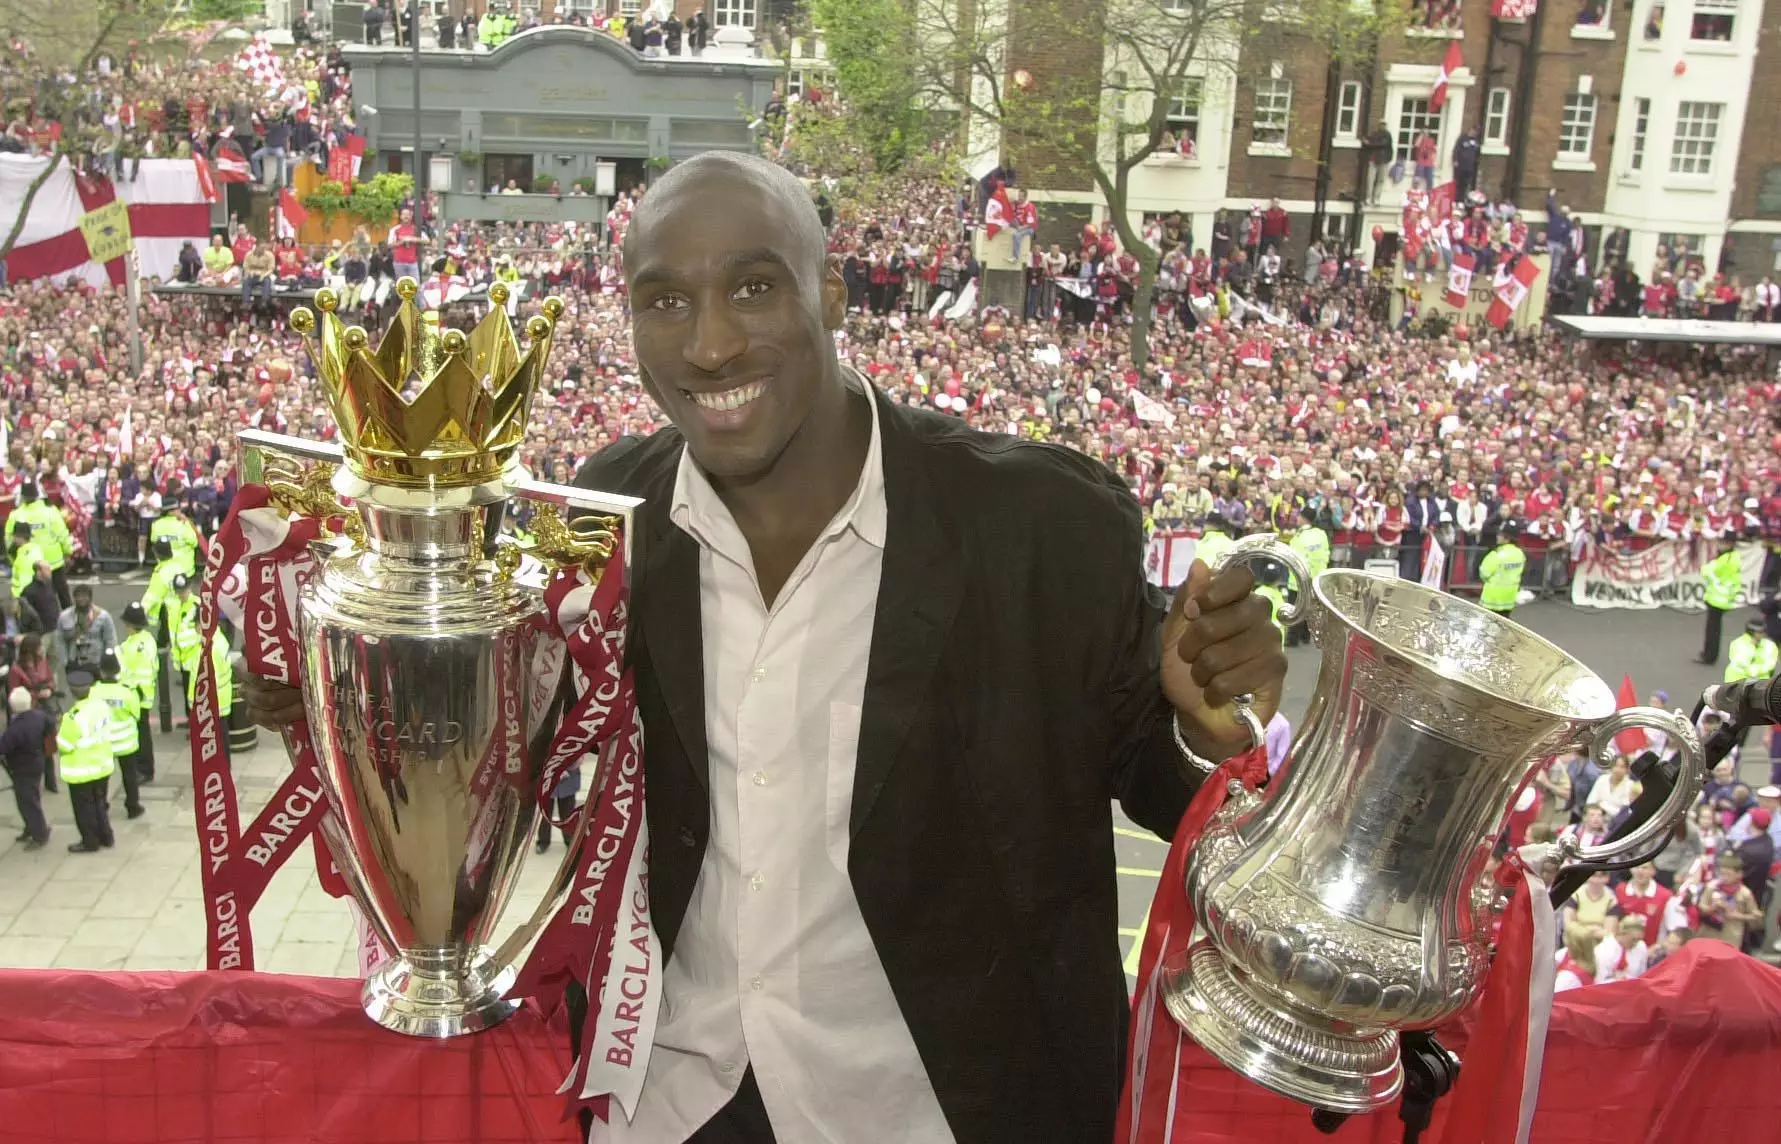 Campbell won the double with Arsenal, only angering Spurs fans further. Image: PA Images